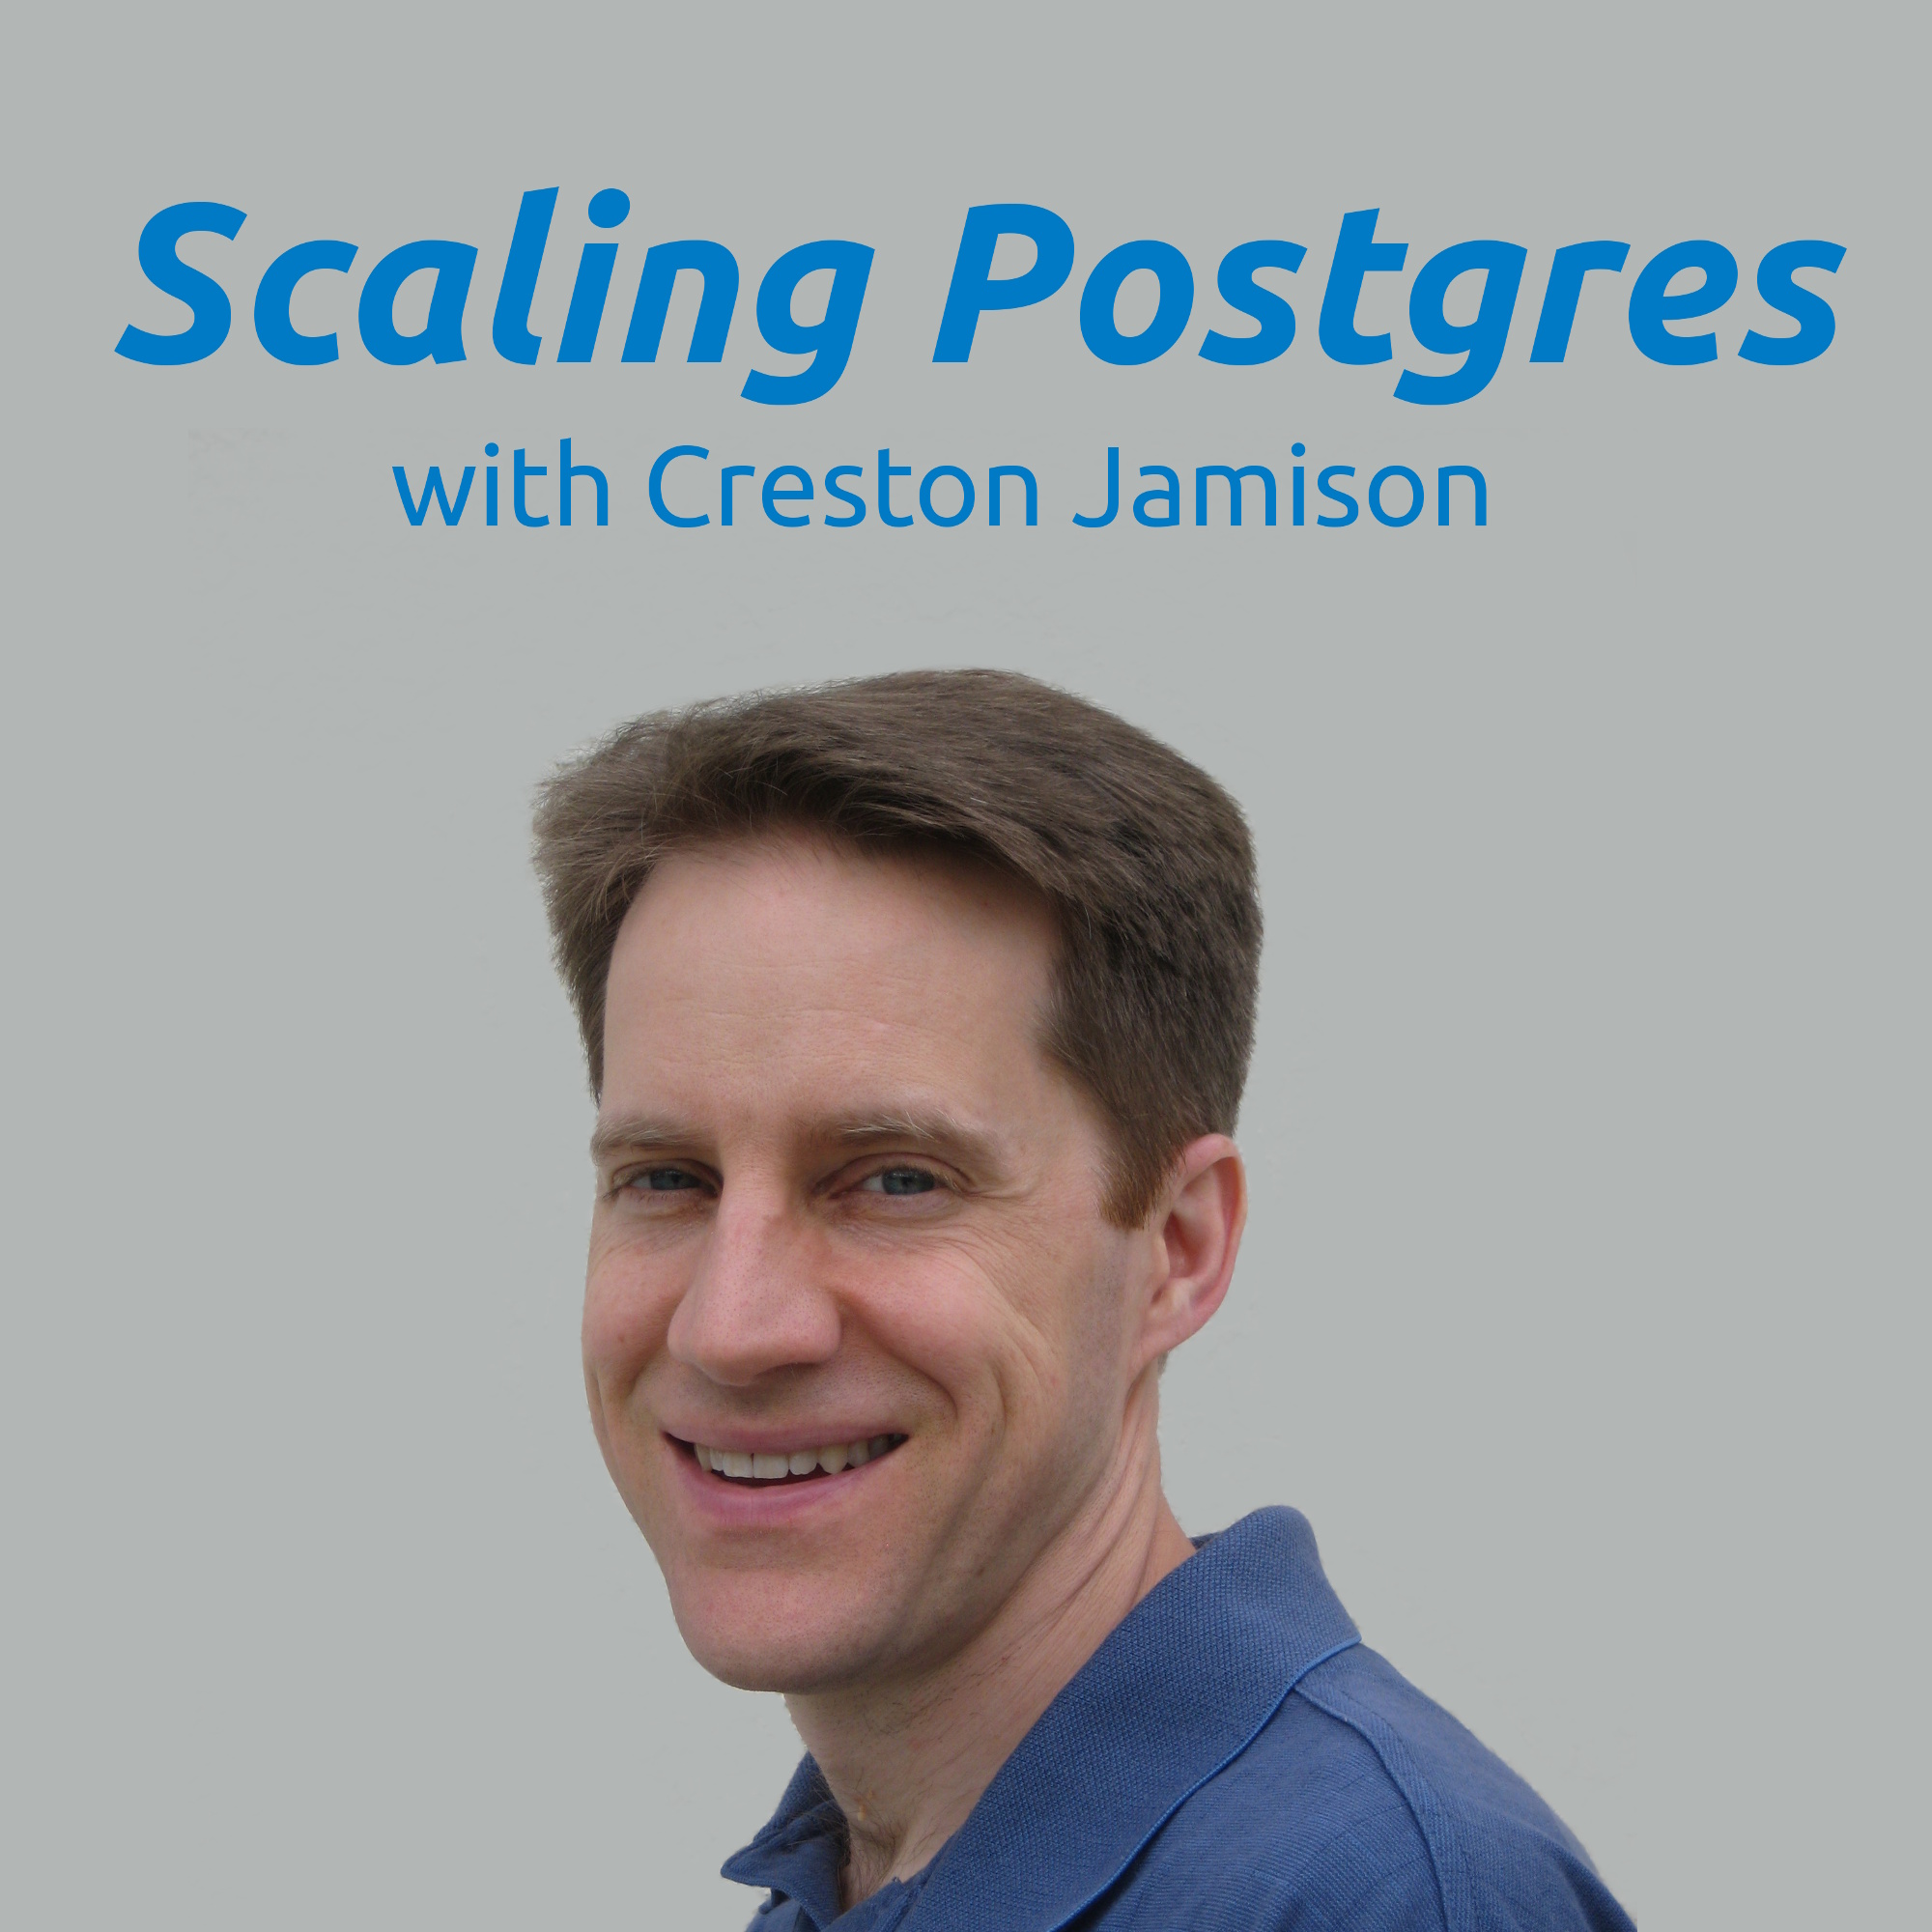 Foreign Key Indexes, Graph Queries, Linux Huge Pages, Text Column Size | Scaling Postgres 192